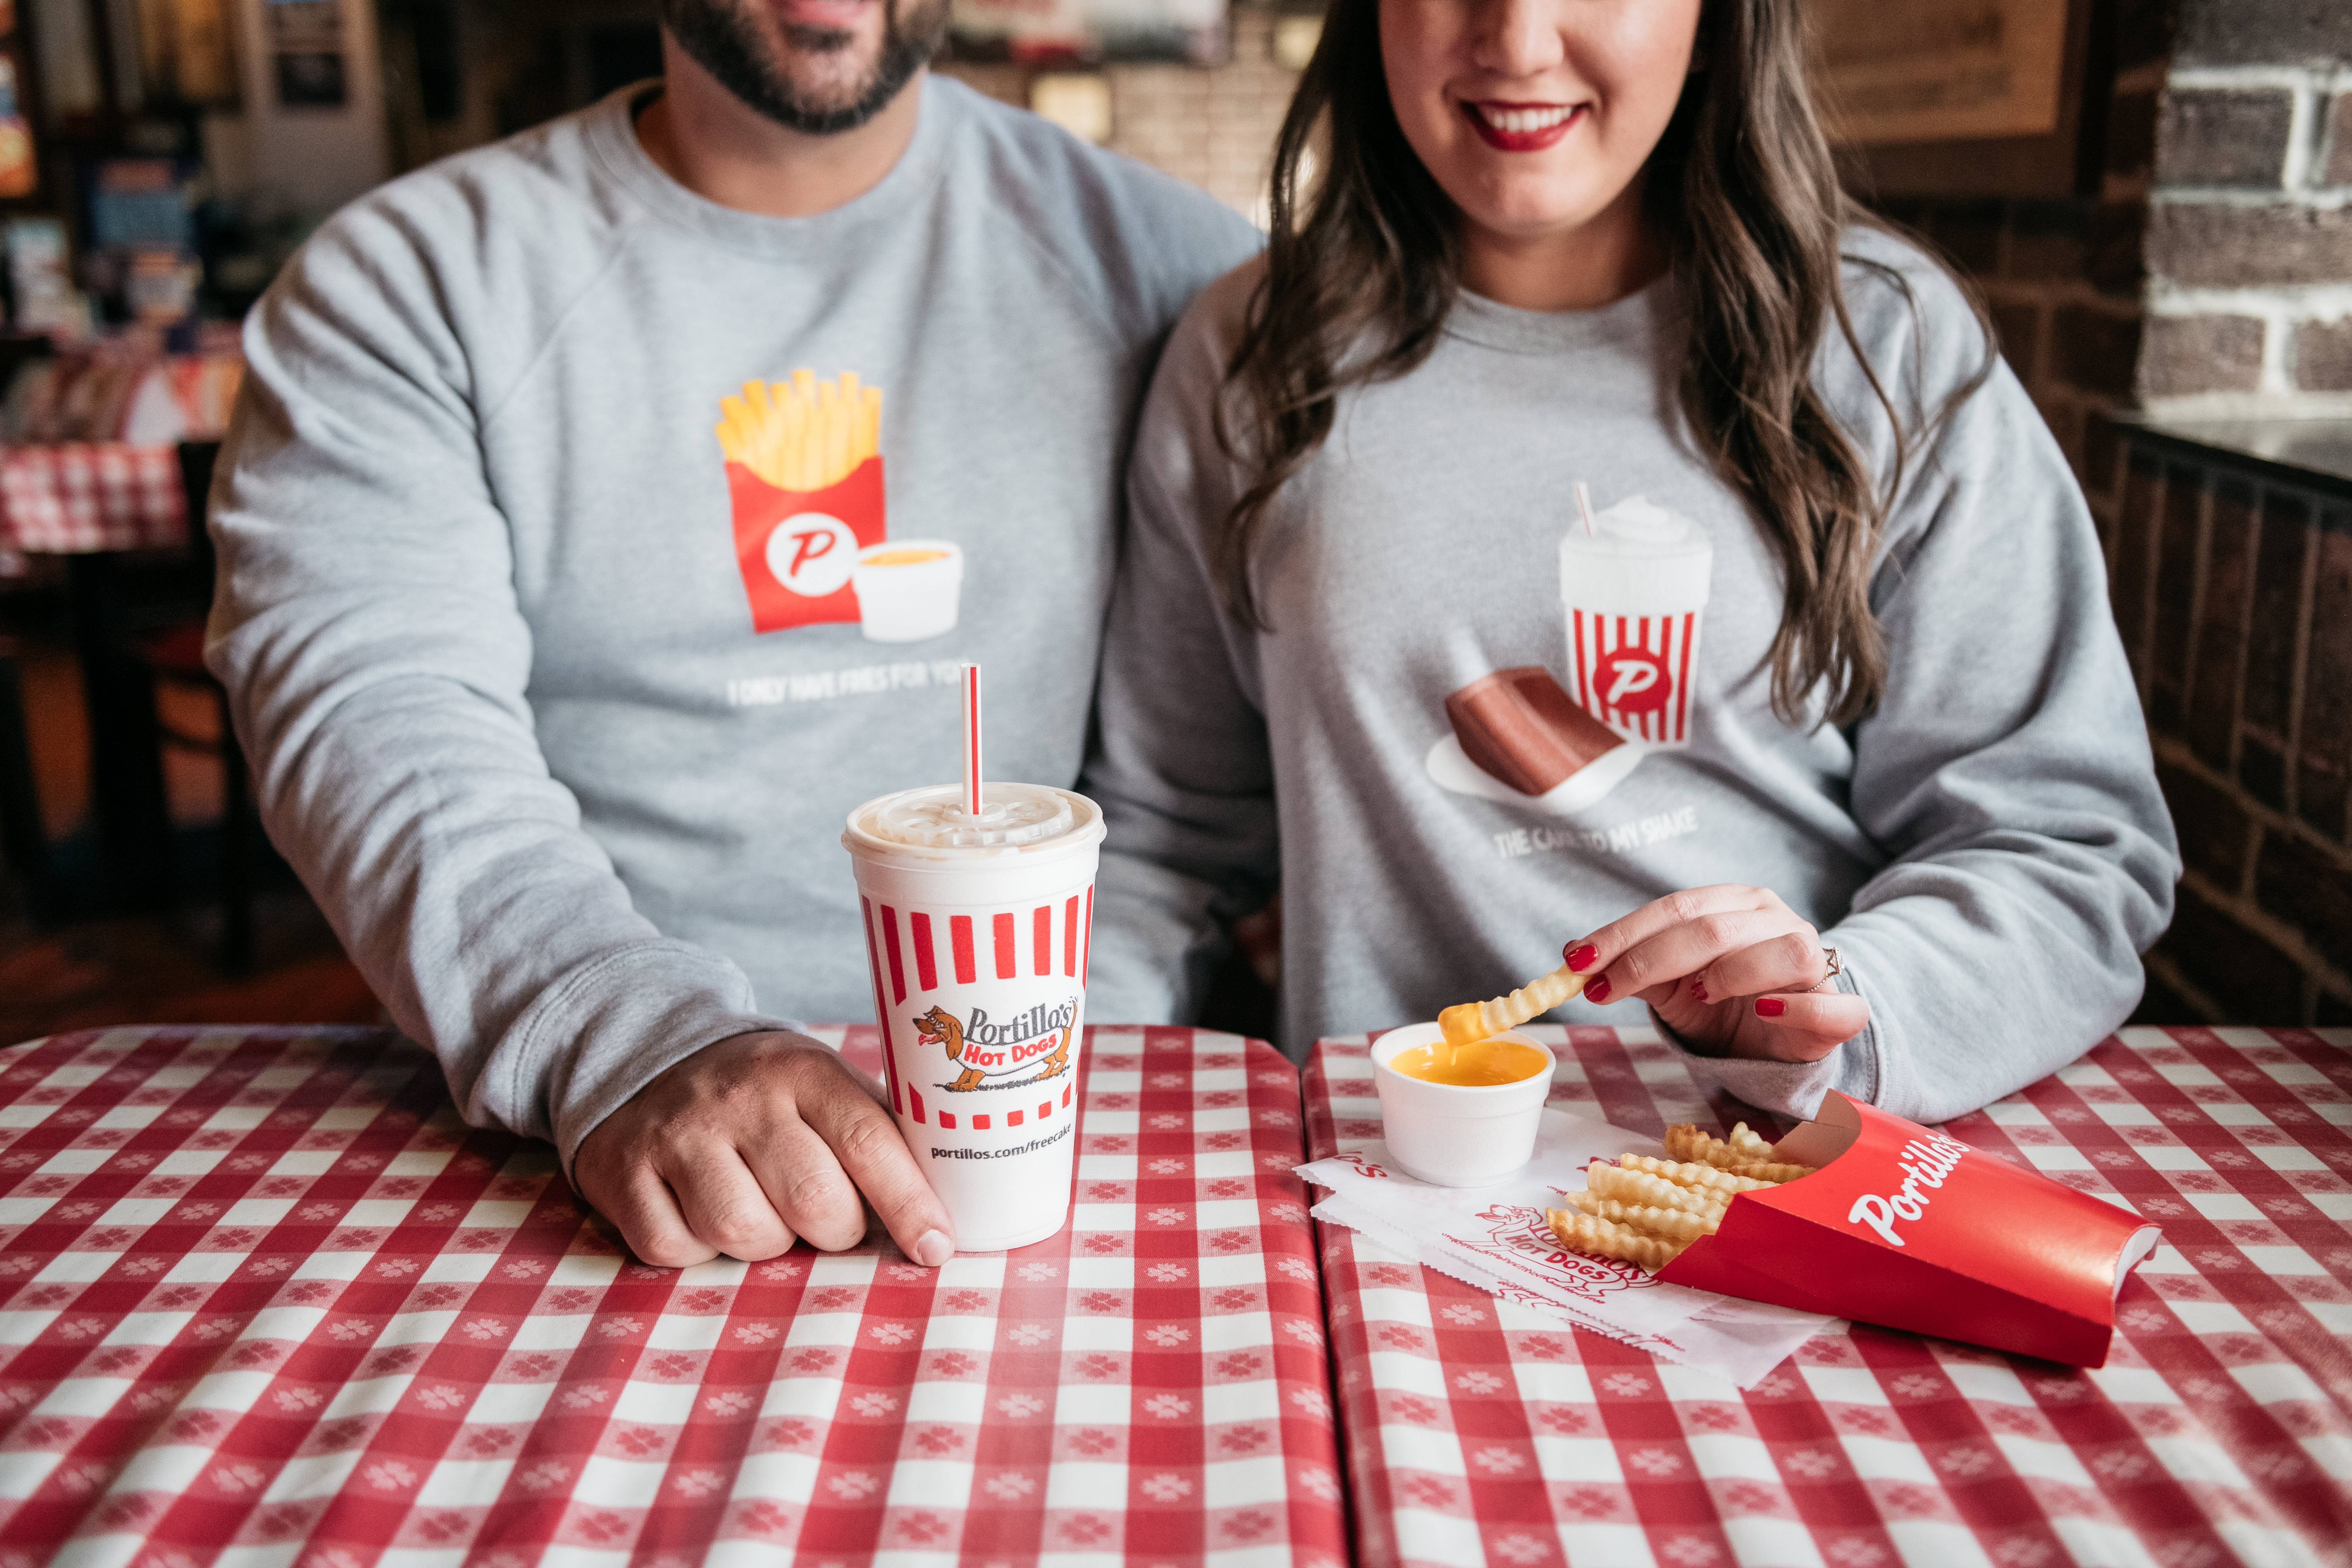 A white man and white woman sit next to each other at a table covered with a checkered cloth. They hold a container of fries and a soda cup.